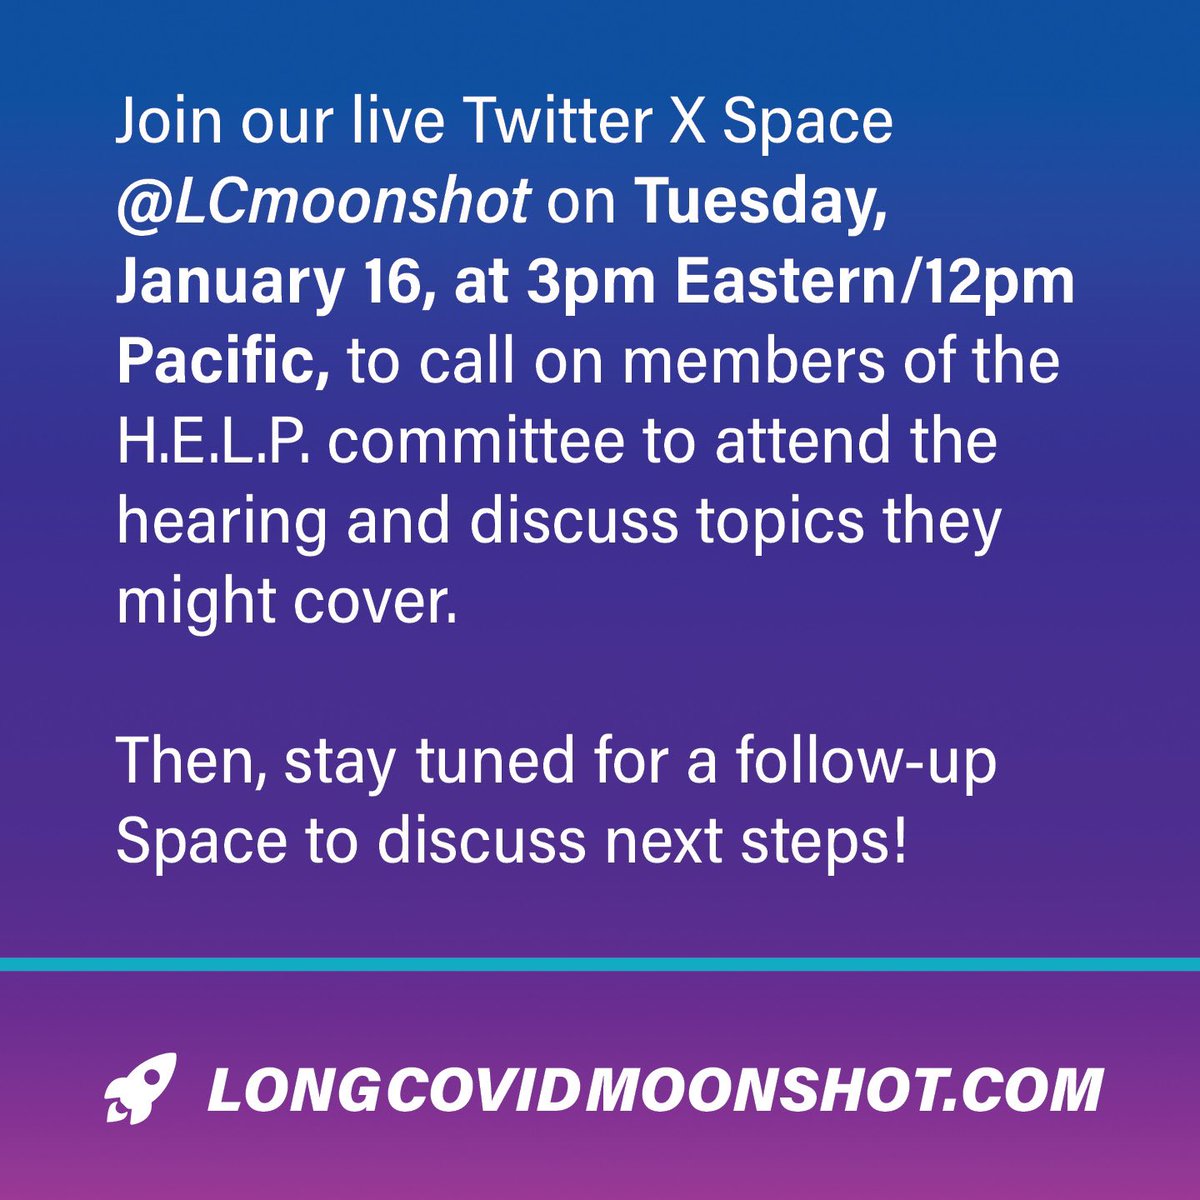 Join our live Twitter X Space @LCmoonshot on Tuesday, January 16, at 3pm Eastern/12pm Pacific, to call on members of the H.E.L.P. committee to attend the hearing and discuss topics they might cover. Then, stay tuned for a follow-up Space to discuss next steps!